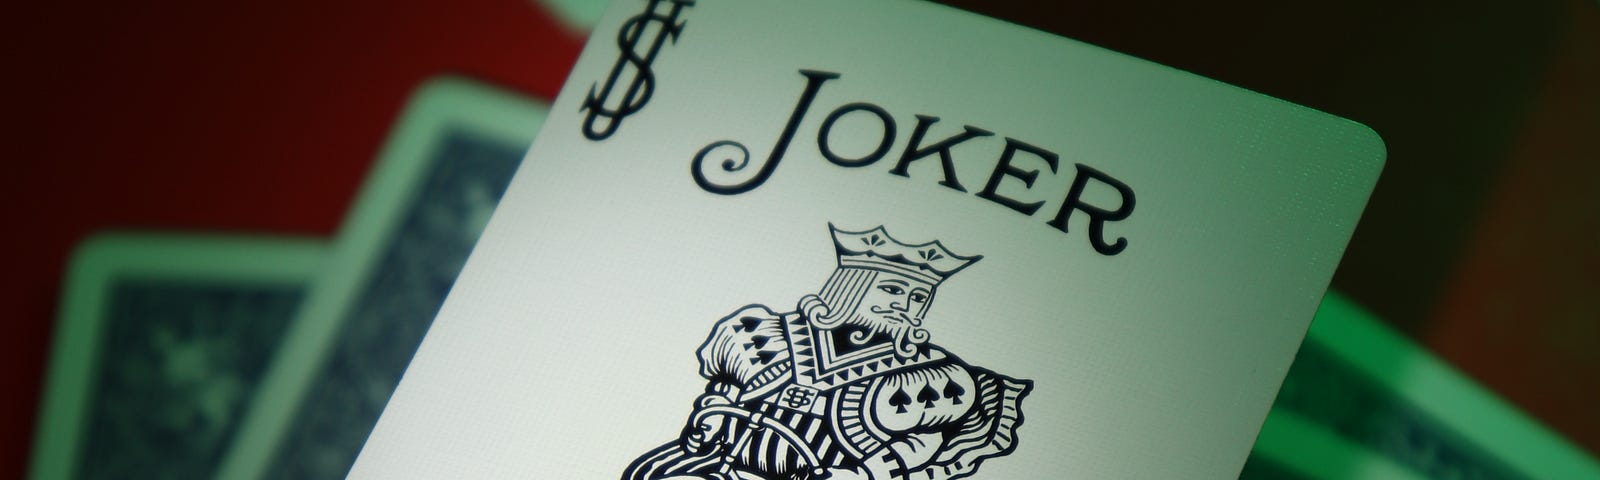 Joker card, atop several face-down cards, black-on-white image featuring line-drawing of figure on bicycle; red background.